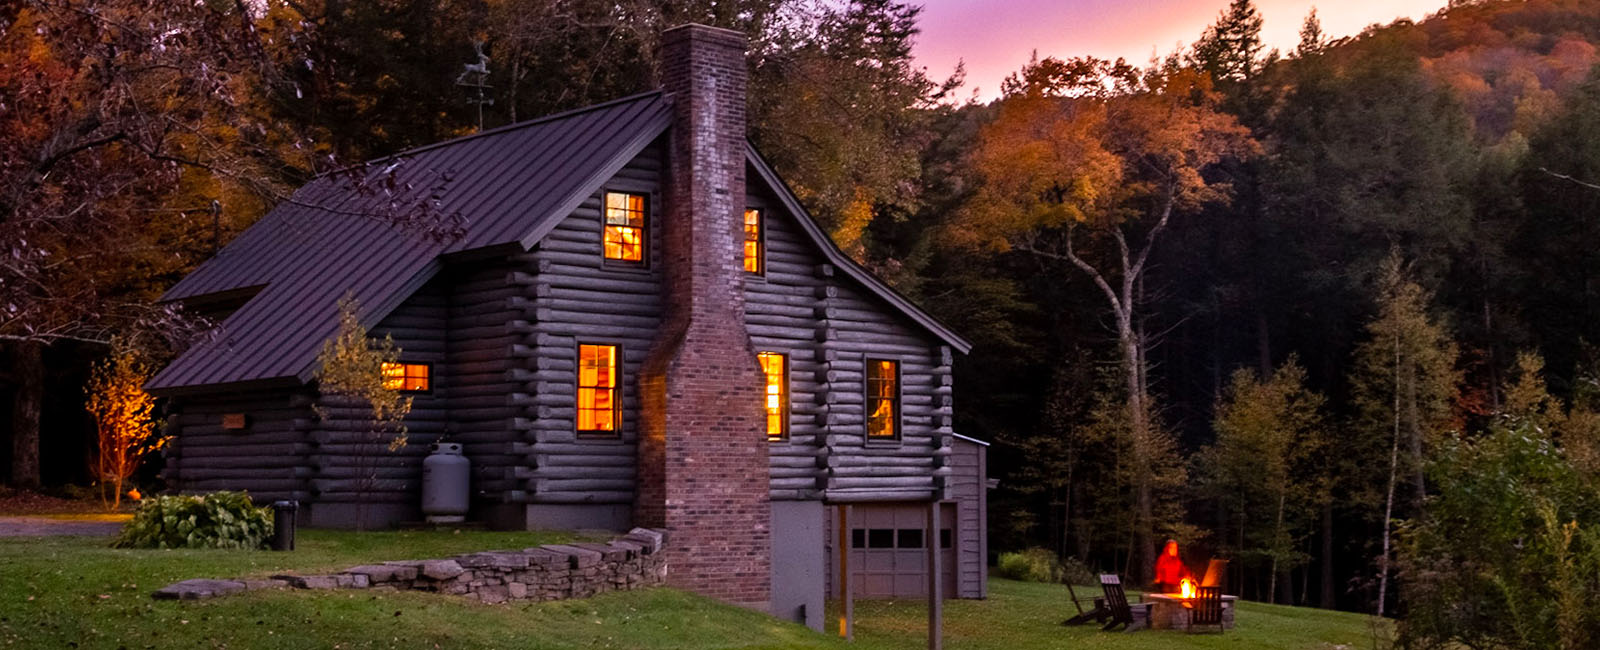 How to Downsize And Enjoy a Not So Large Log Home